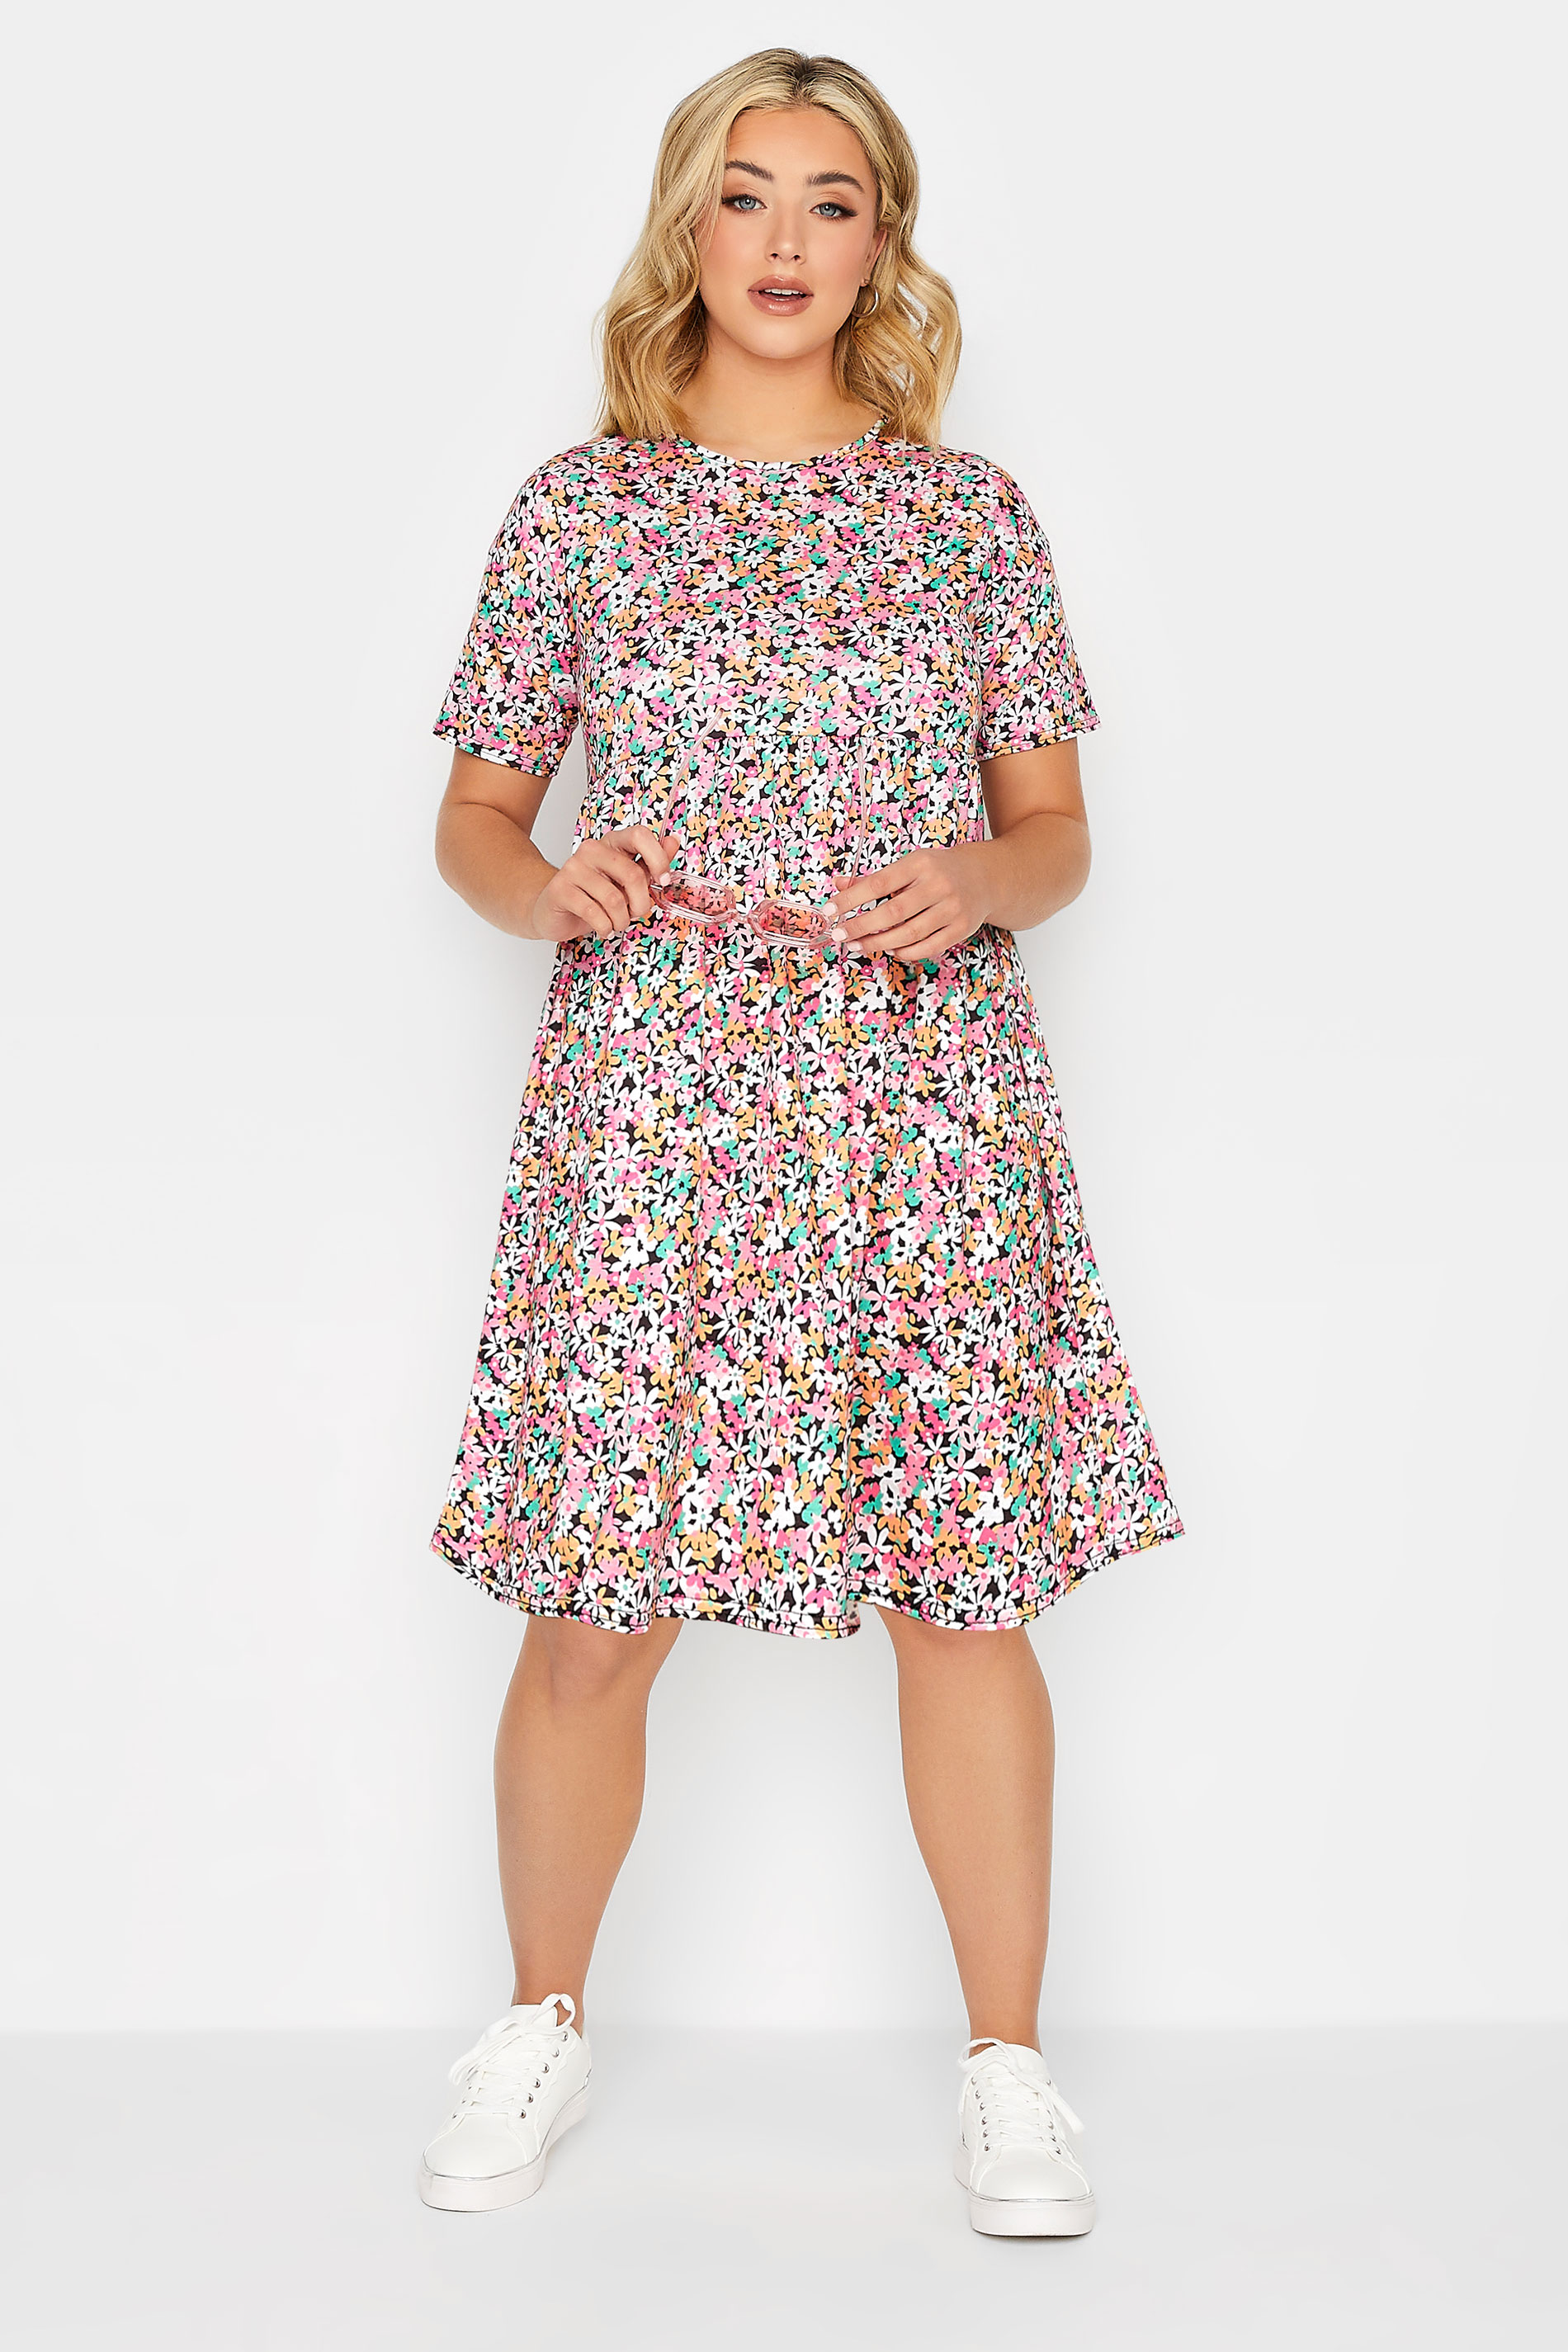 YOURS PETITE Plus Size Pink Ditsy Floral Print Smock Dress | Yours Clothing 2